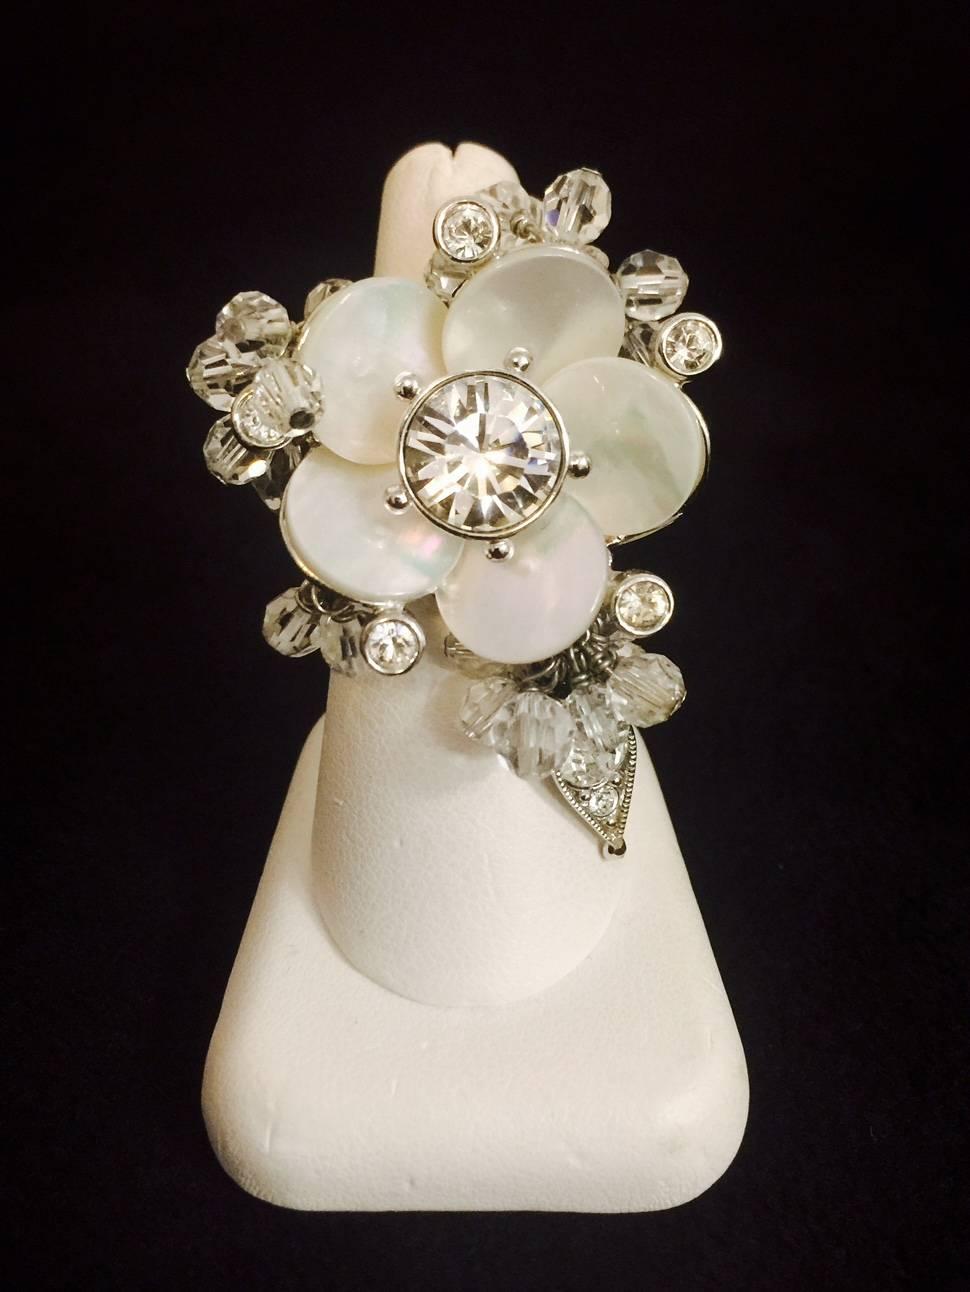 From the world renowned Dior comes this delightful ring in silver tone featuring a centered flower crafted in shell mother of pearl. Wide, thick, substantial tapered shank. Three dangling sections are fabricated with Swarovski crystals and faceted